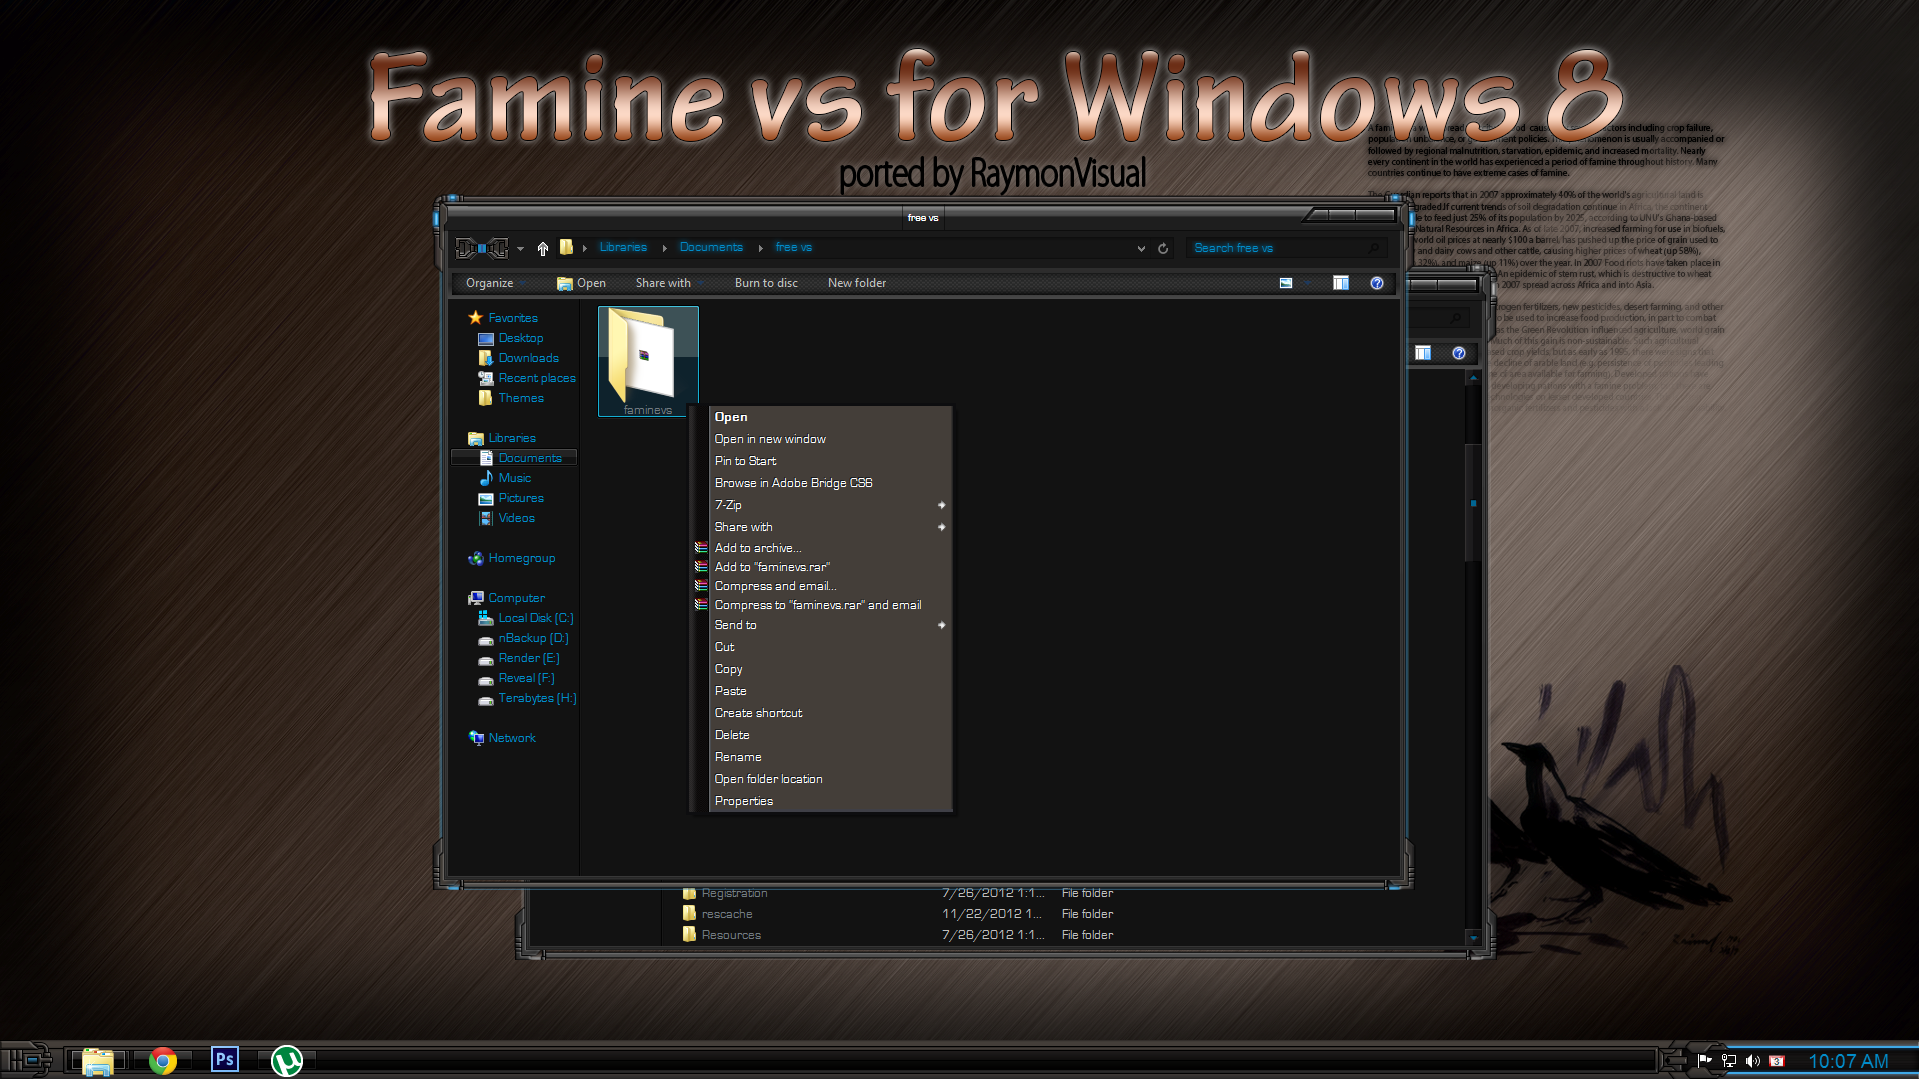 famine_vs_for_windows8_by_raymonvisual-d5luogs.png